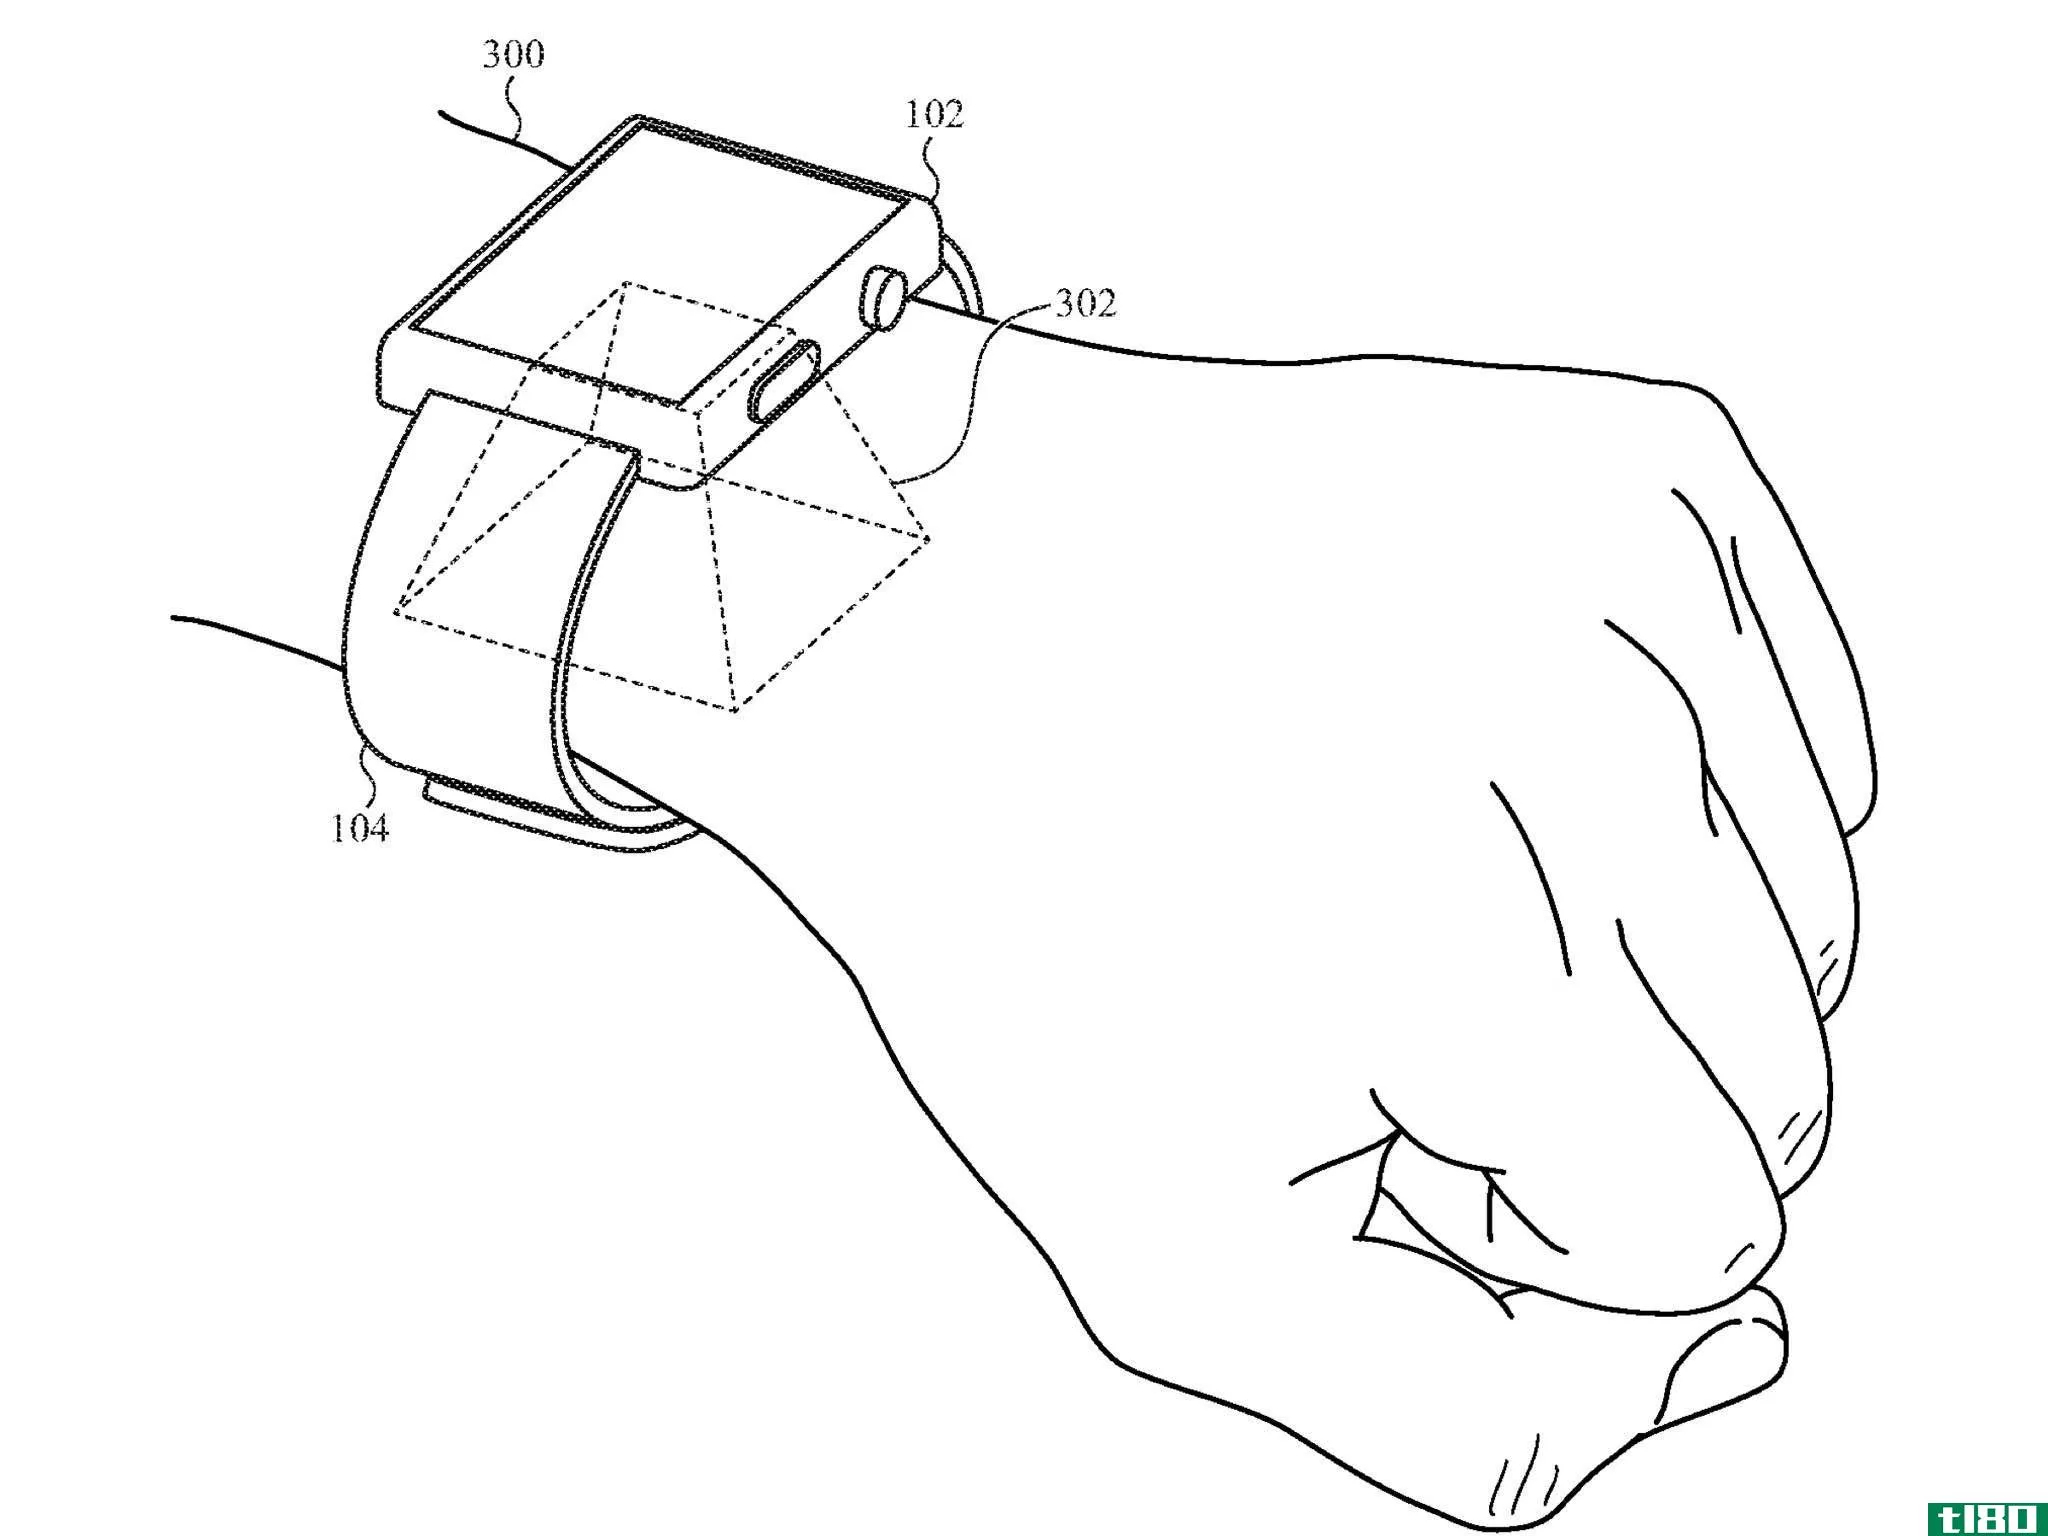 A drawing accompanying Apple's patent application for a Wrist ID authentication system for Apple Watch